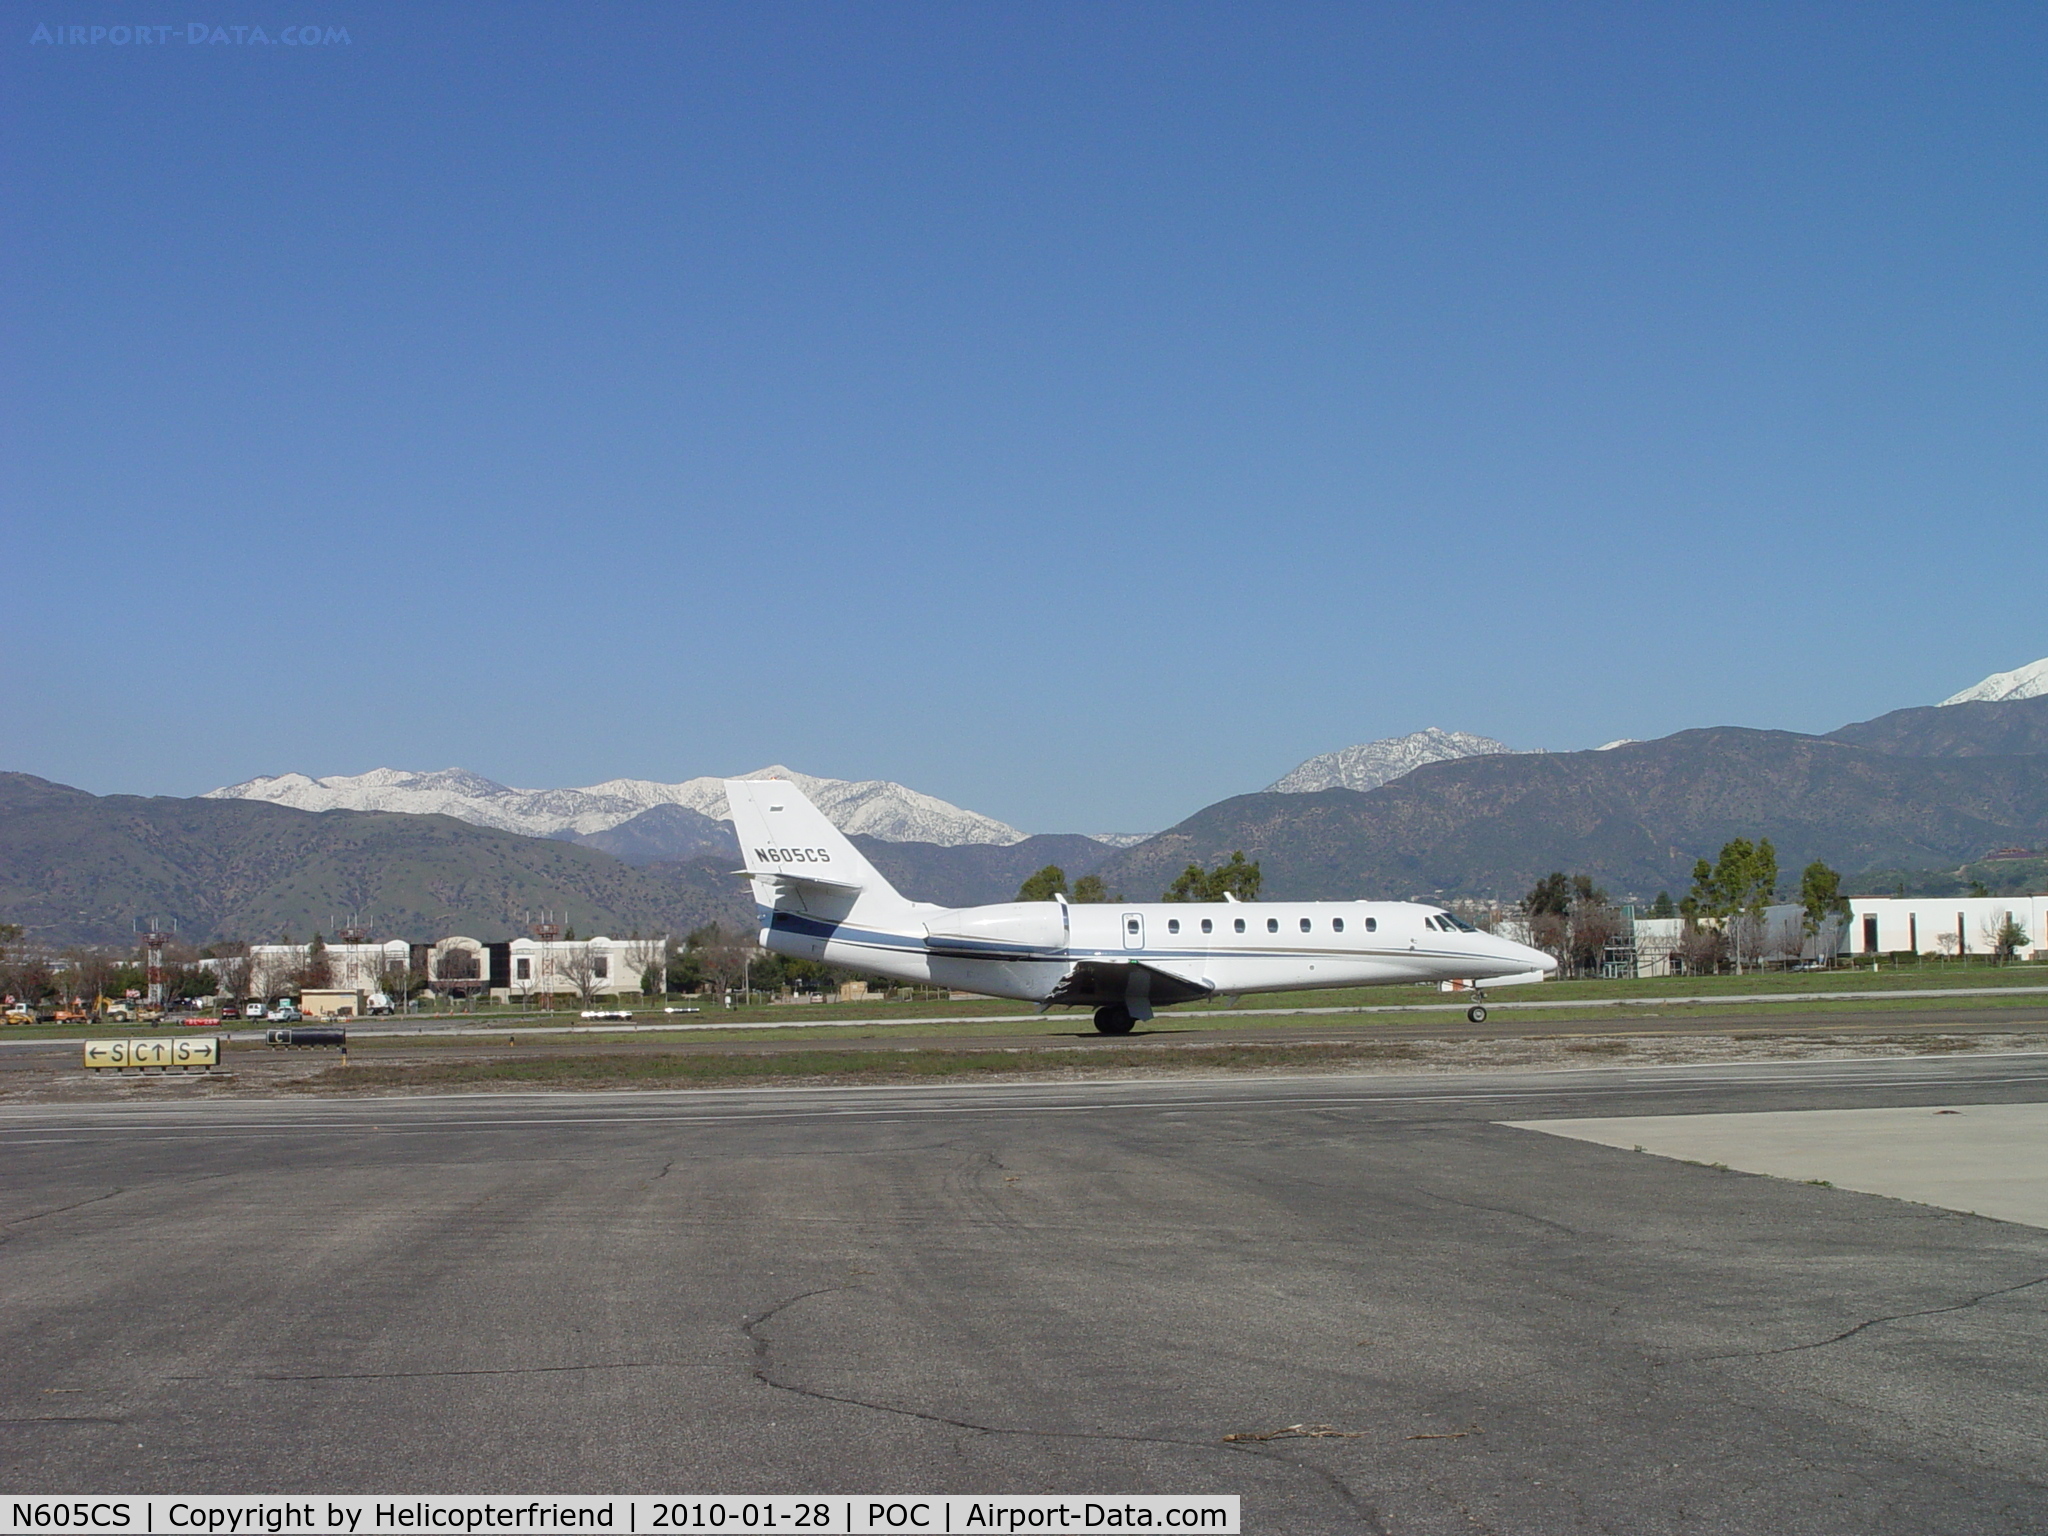 N605CS, 2006 Cessna 680 Citation Sovereign C/N 680-0001, Taxiing to runway 26L for take off